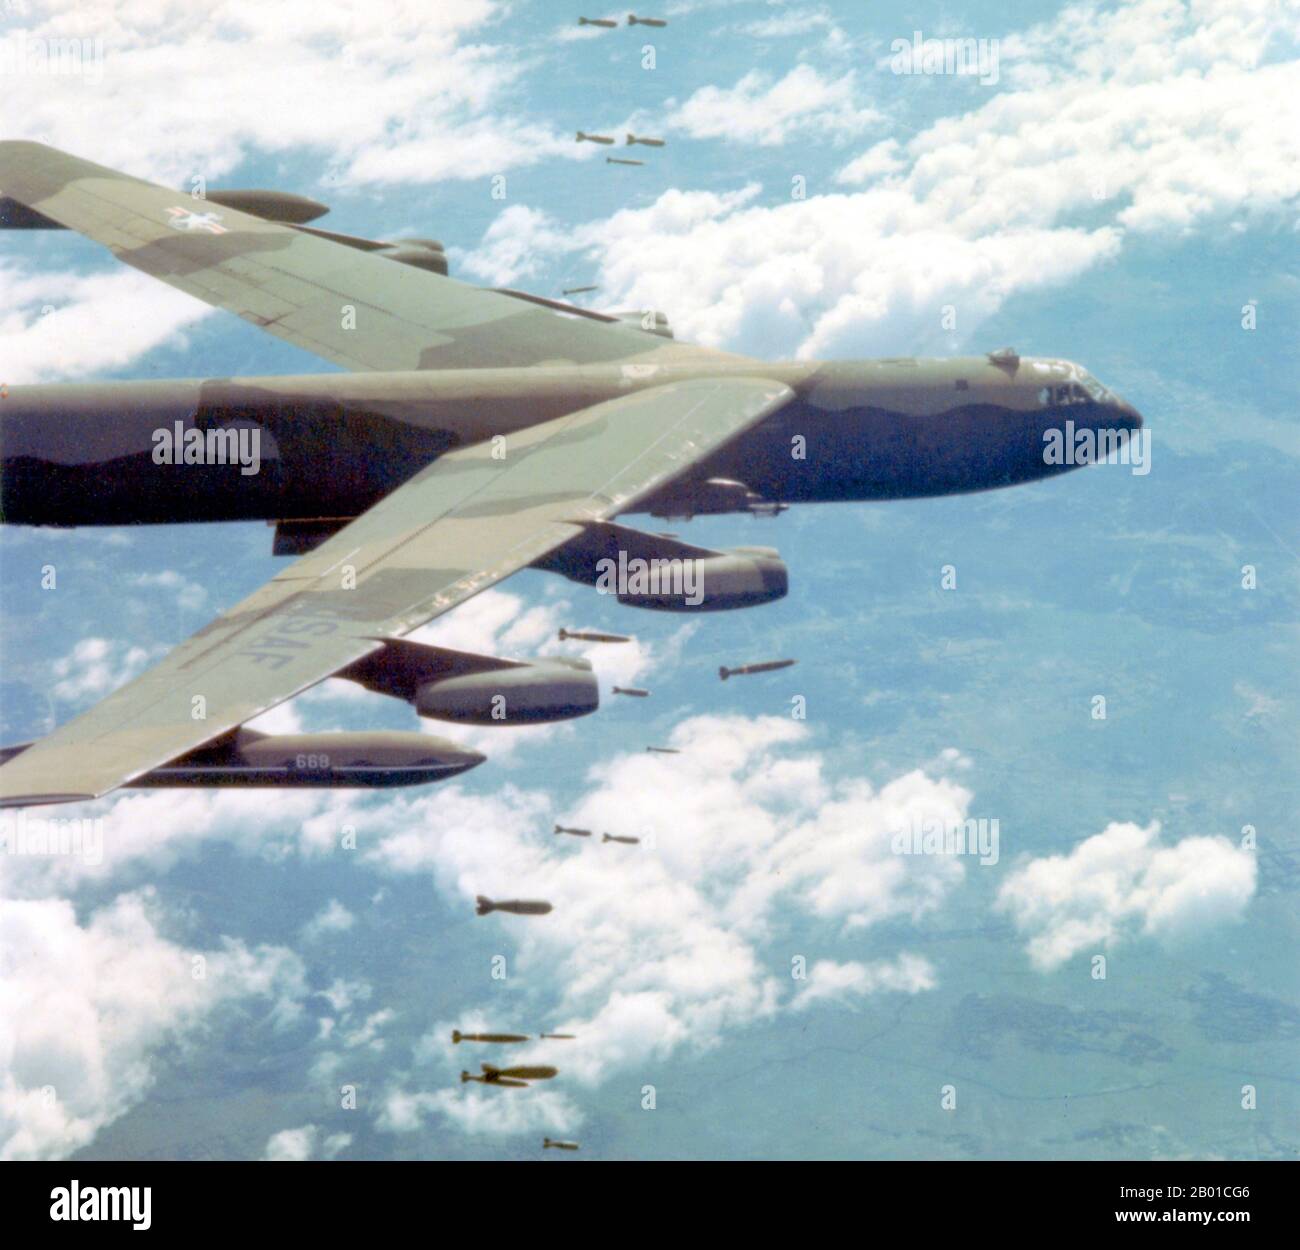 Vietnam: A U.S. Air Force Boeing B-52 Stratofortress dropping bombs over Vietnam, c. 1965-1972.  This aircraft was hit by SA-2 surface-to-air missile over North Vietnam during the 'Linebacker II' offensive on 31 December 1972 and crashed in Laos. The crew of six ejected, but only five were rescued.  Operation Linebacker II was a US Seventh Air Force and US Navy Task Force 77 aerial bombing campaign, conducted against targets in the Democratic Republic of Vietnam (North Vietnam) during the final period of US involvement in the Vietnam War. Stock Photo